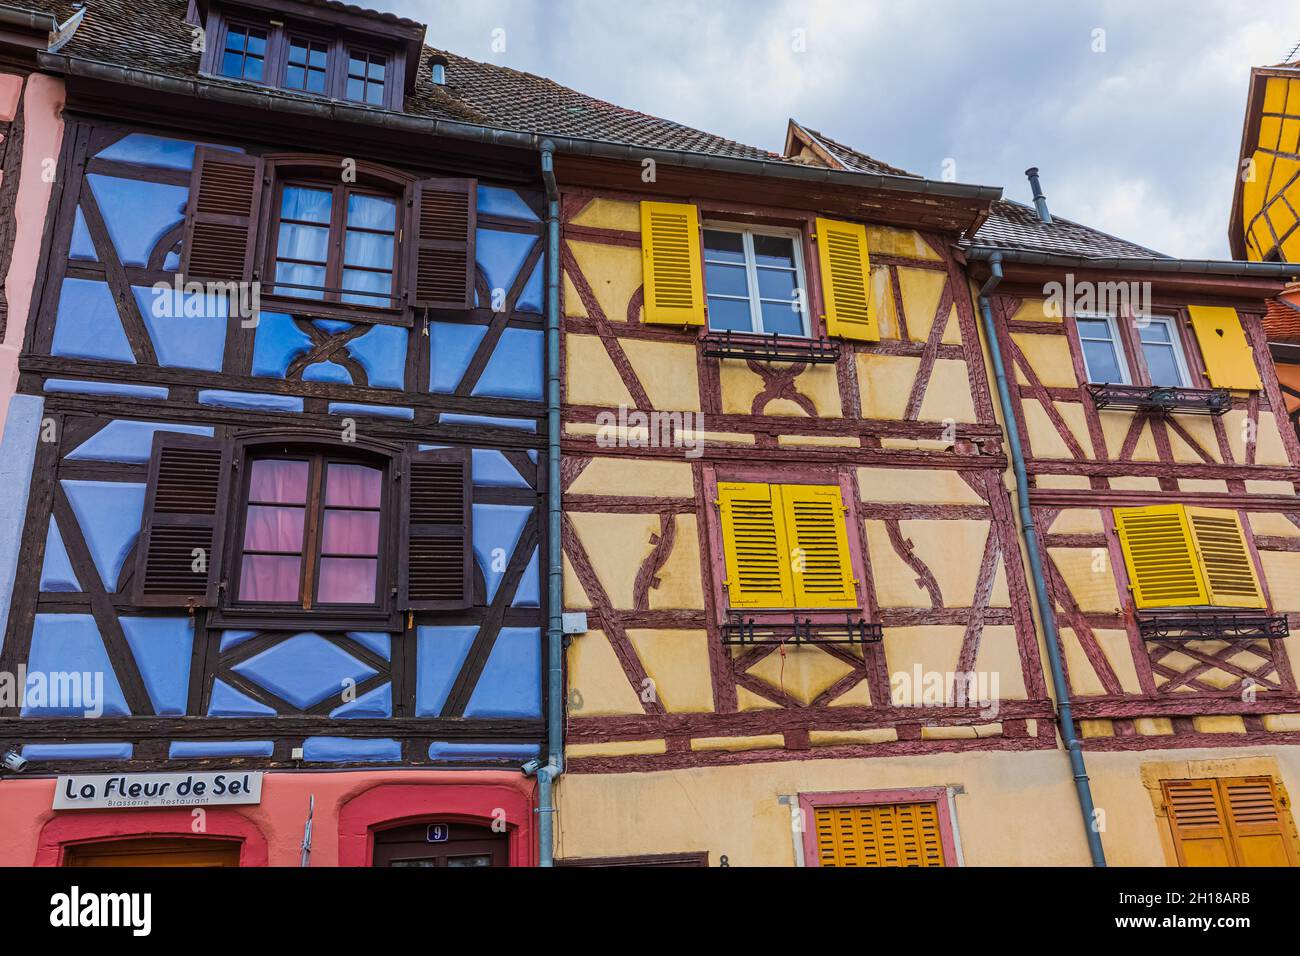 Colmar with his traditional colorful half-timbered houses in the Alsace region, France. Colmar is a city and commune in the Haut-Rhin department and G Stock Photo